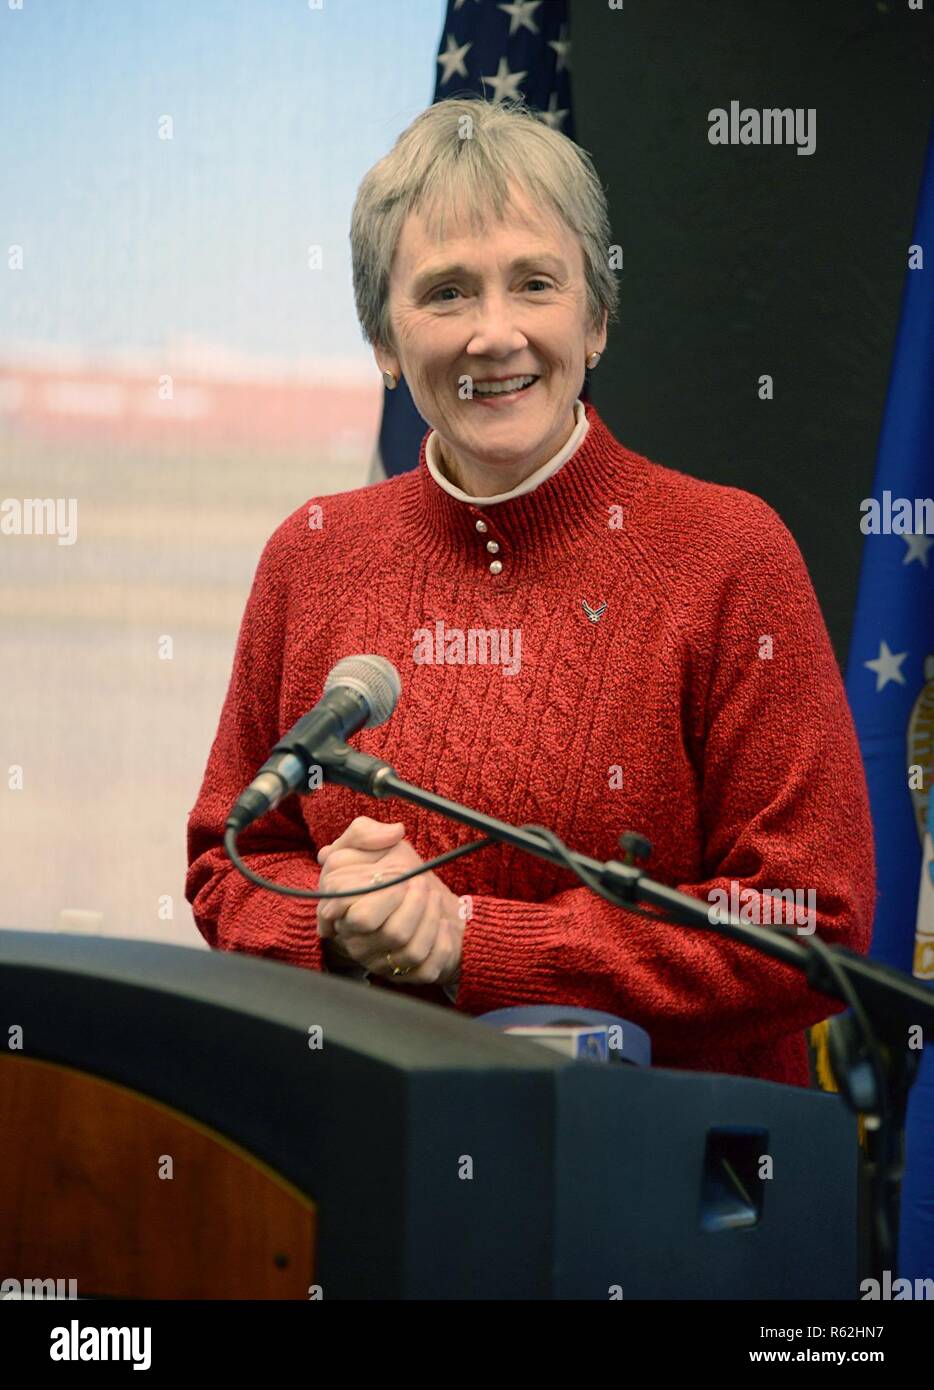 During her visit Nov. 16, Secretary of the Air Force Heather Wilson announced that Tinker Air Force Base has been chosen as the future site for depot maintenance and sustainment of the B-21 Raider, the next generation long-range strike bomber. Wilson is shown at the podium during the announcement. Stock Photo